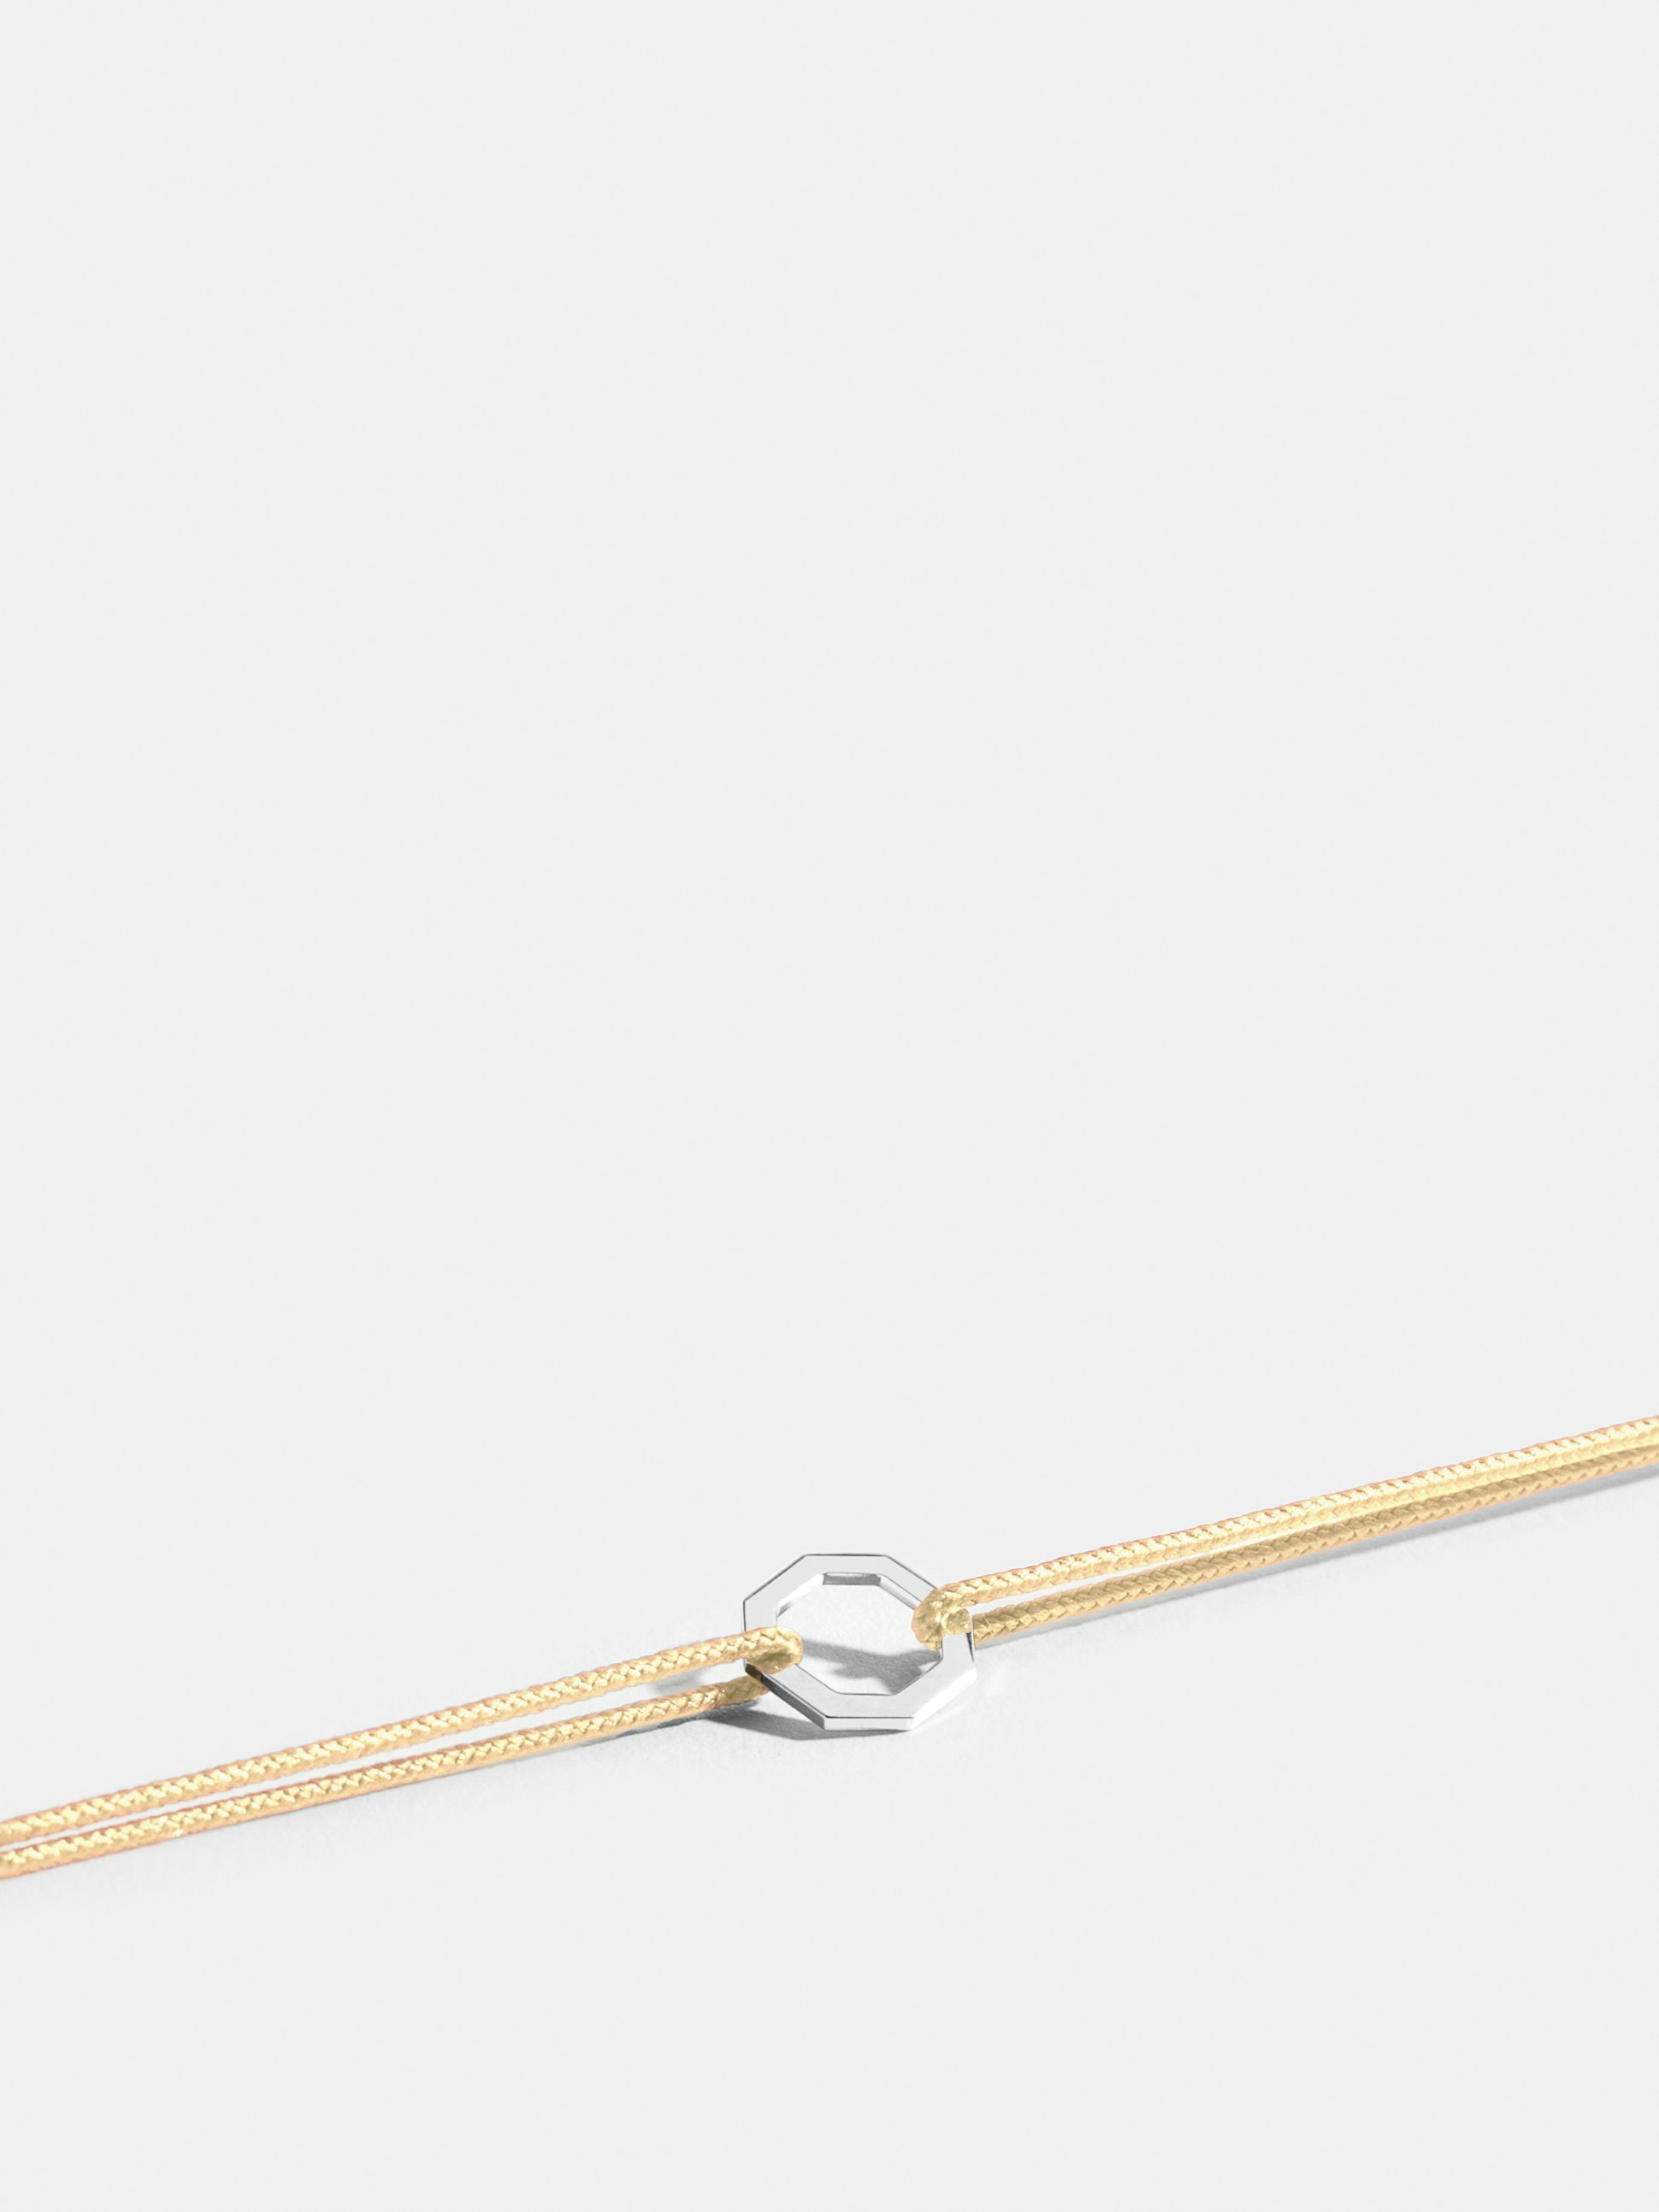 Octogone motif in 18k Fairmined ethical white gold, on an ivory white cord. 